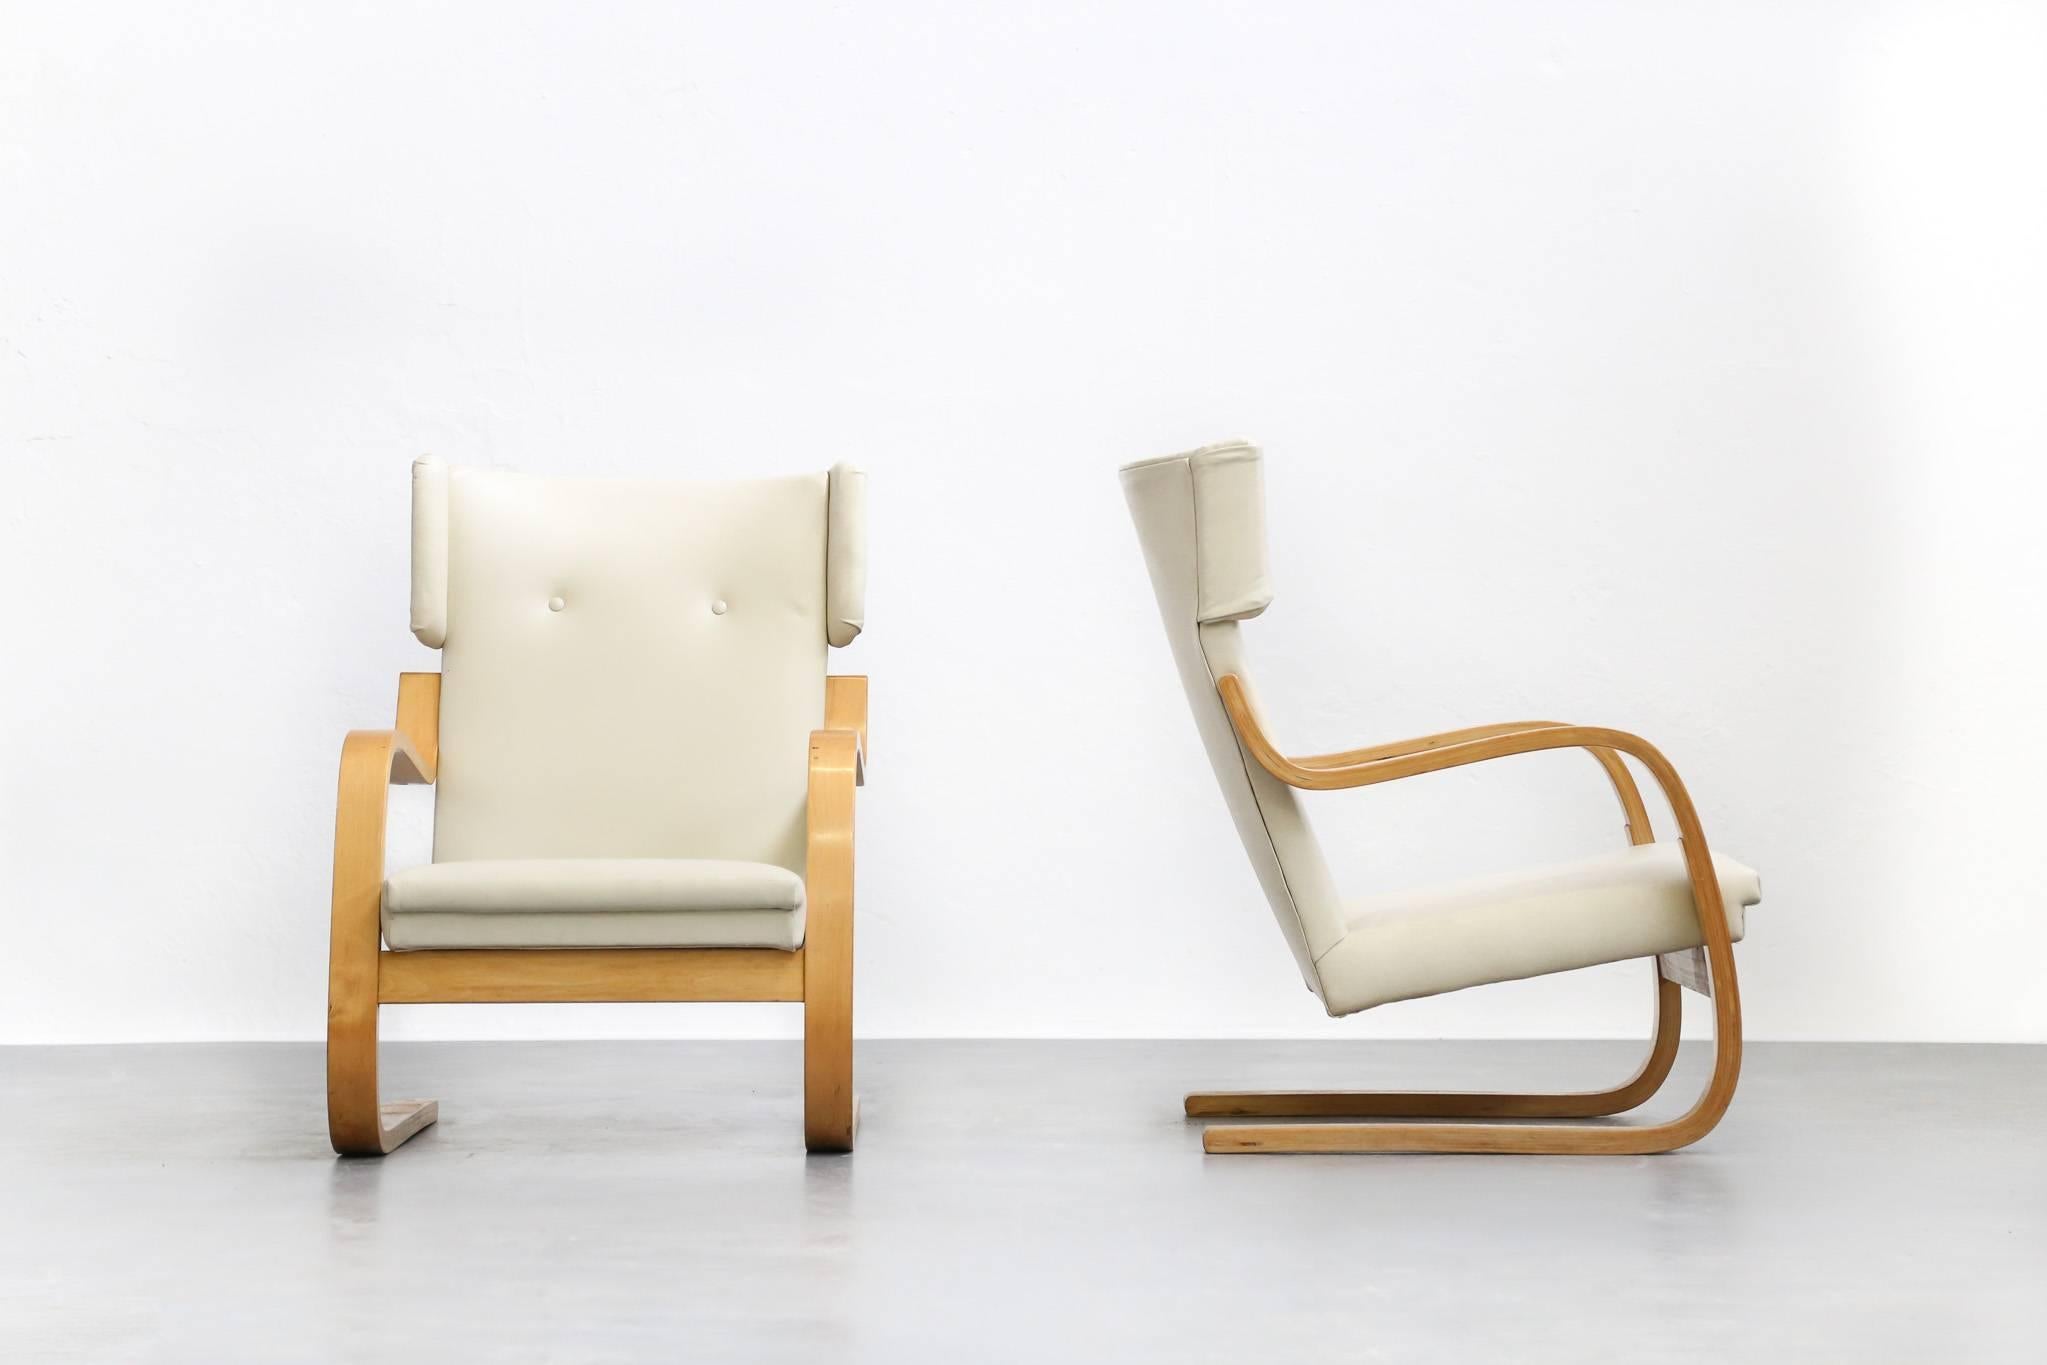 First edition 1935 of Scandinavian lounge chair, this model 401 designed by Alvar Aalto 
Stamped with 